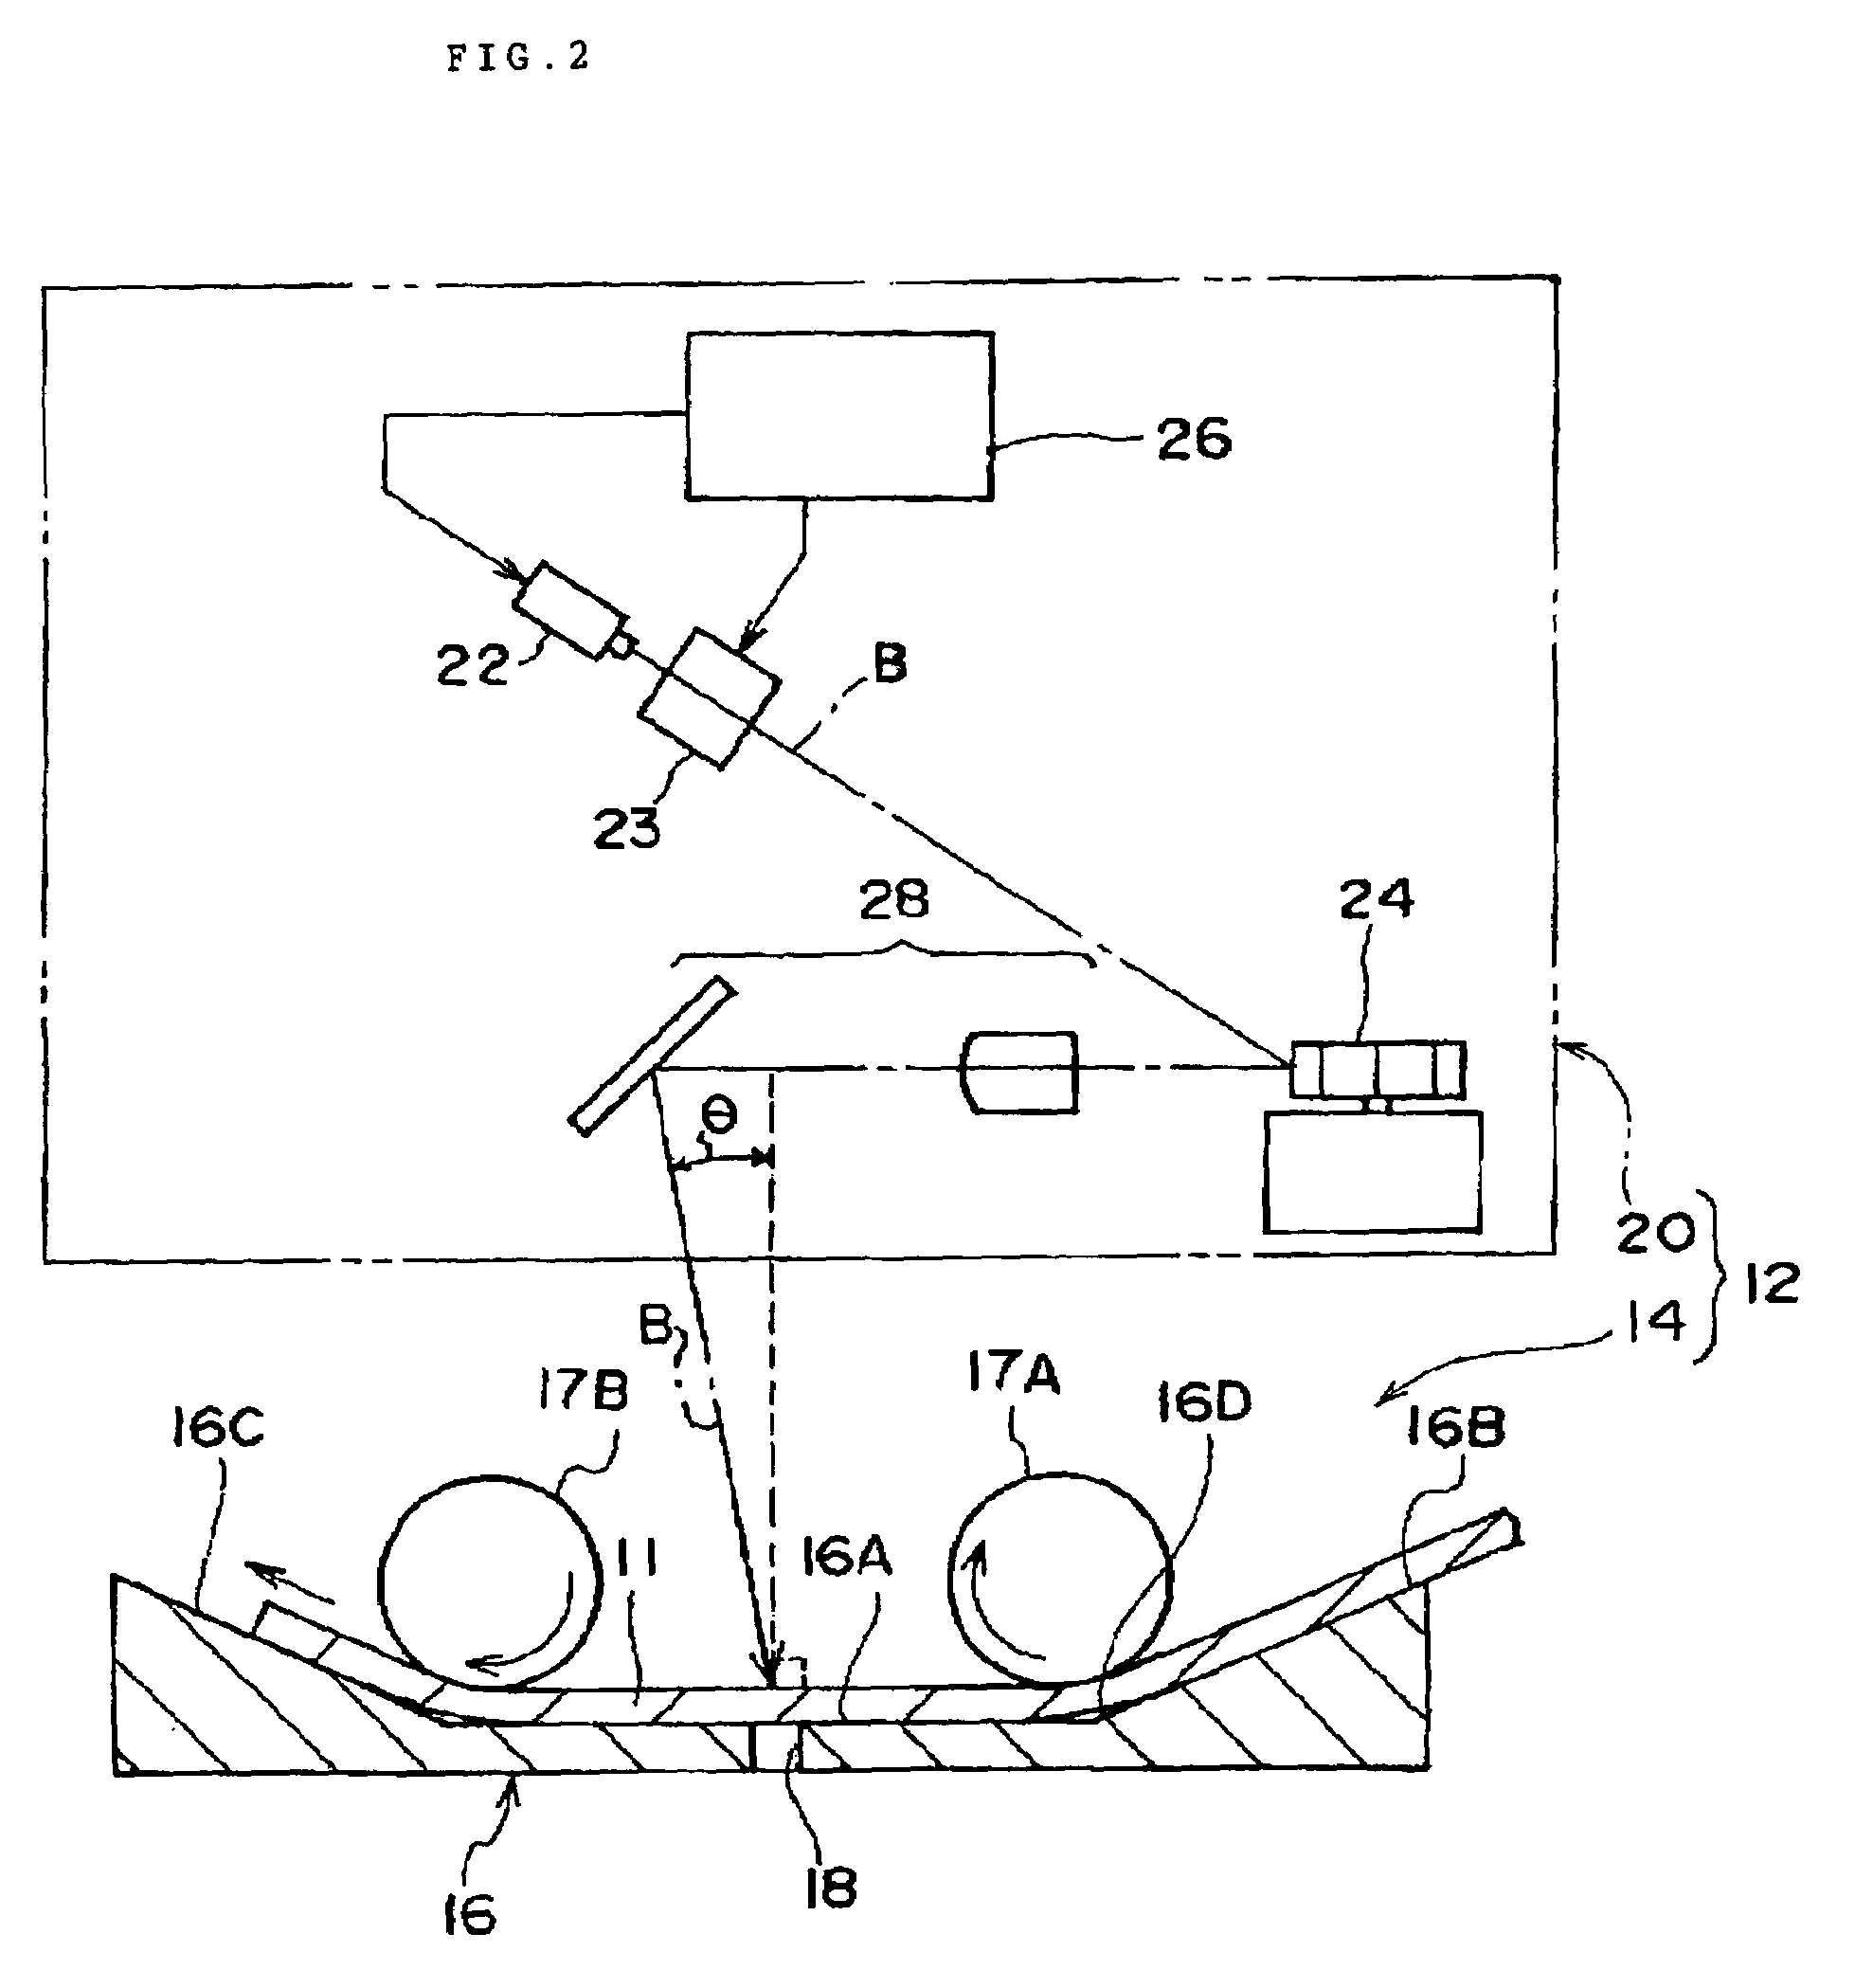 Image forming method for the photothermographic material